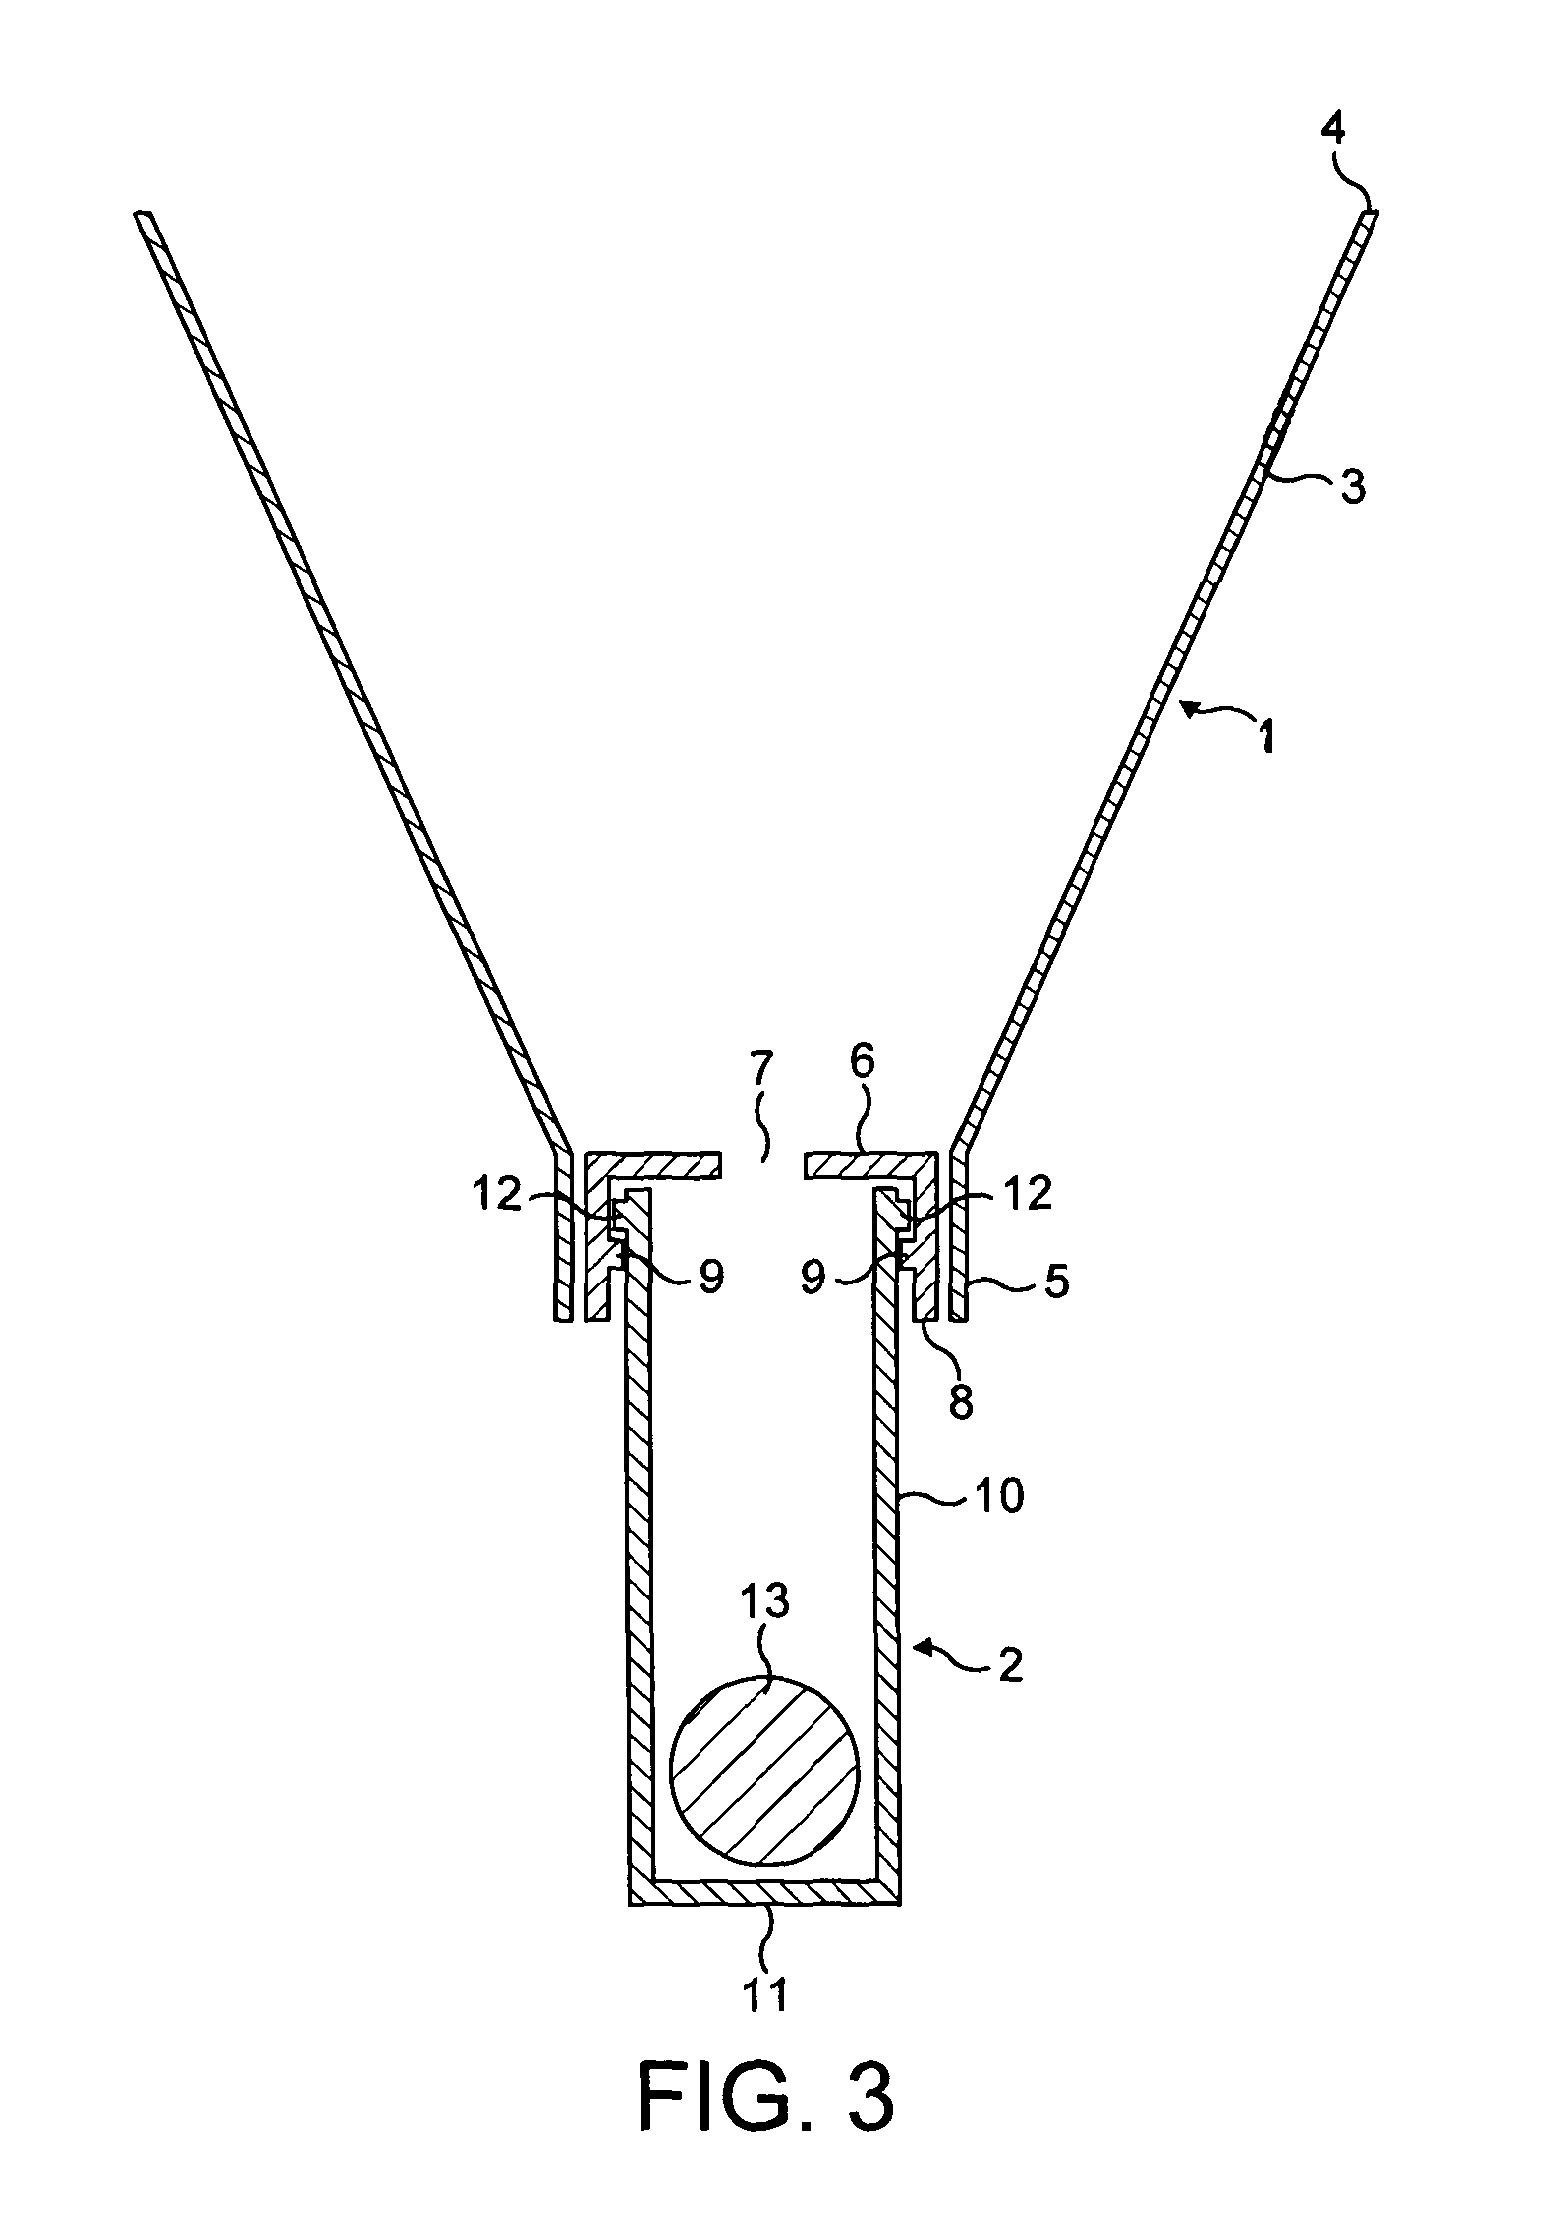 Method for Detection of Inflammation in the Urinary Tract or Urethra